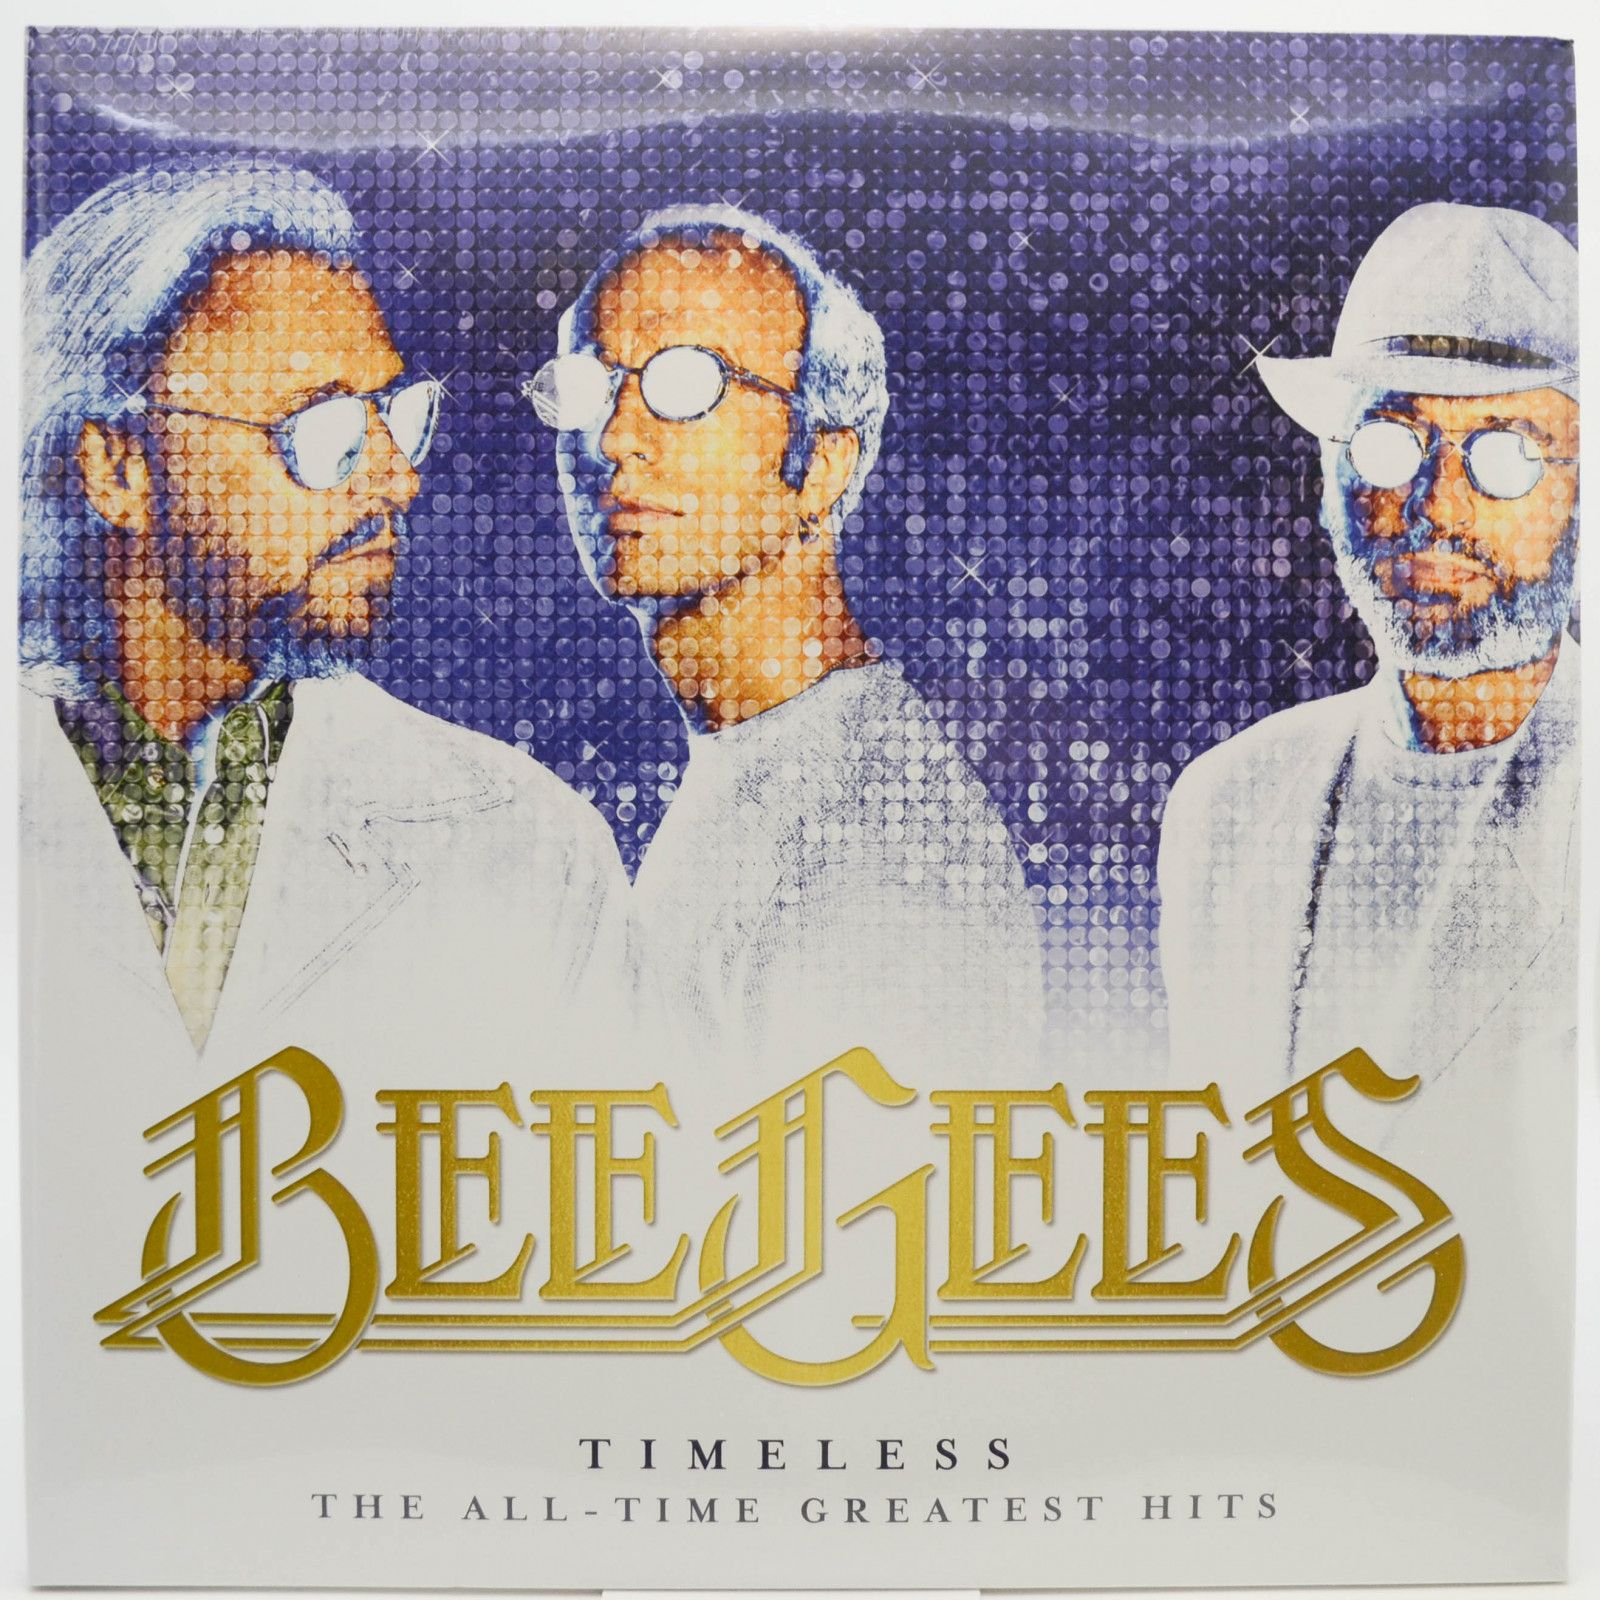 Bee Gees — Timeless (The All-Time Greatest Hits) (2LP), 2017